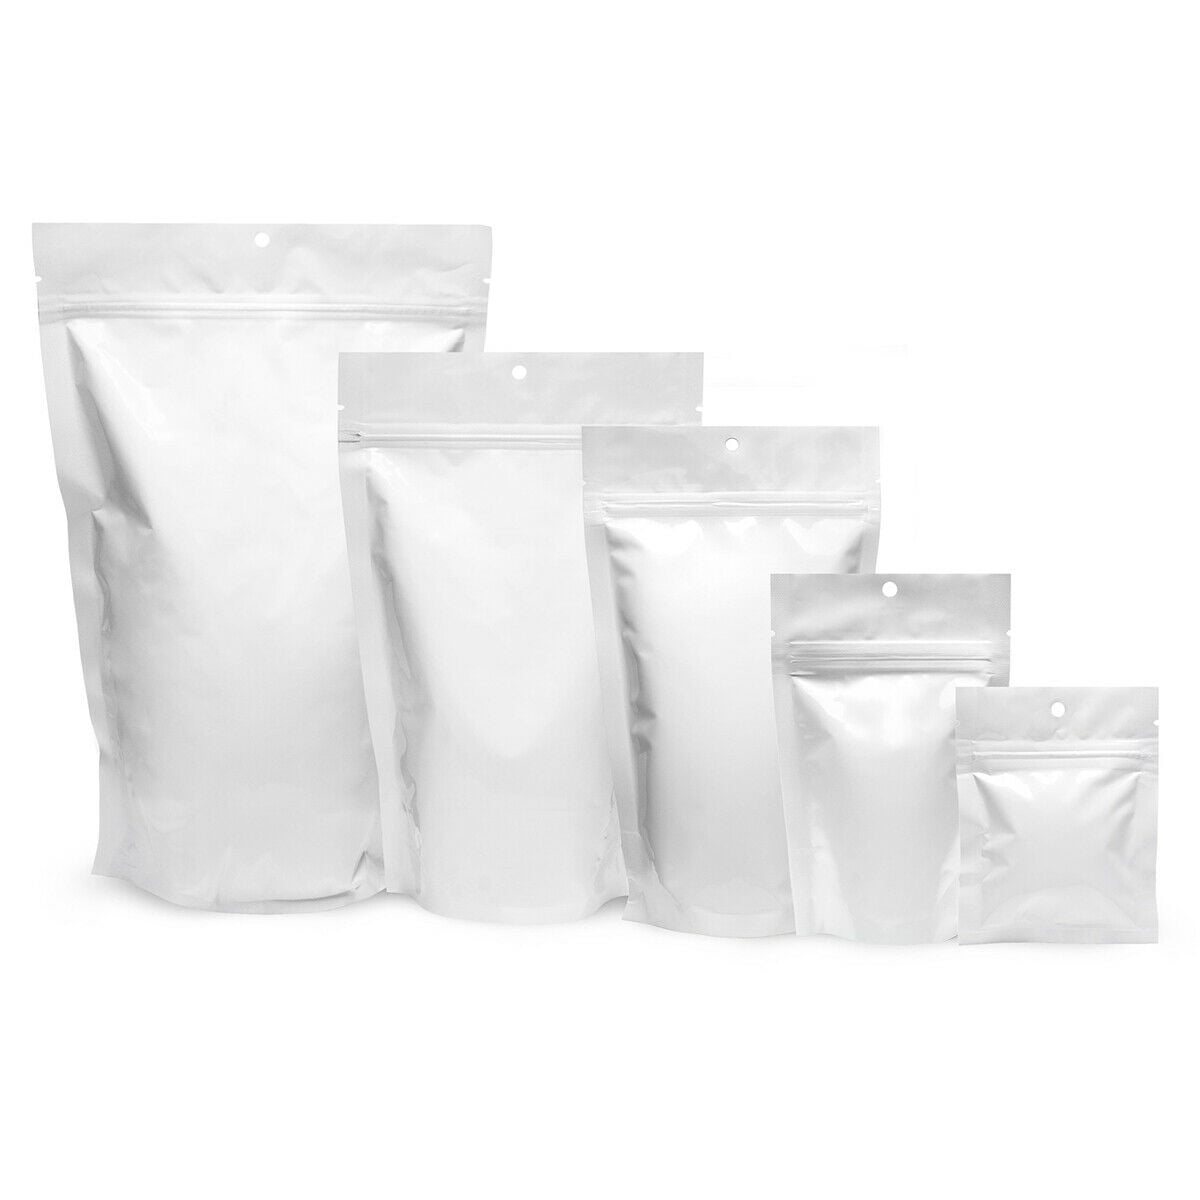 WHITE SHINY STAND UP POUCHES MYLAR FOIL BAG HEAT SEAL FOOD GRADE ZIP LOCK BAGS 